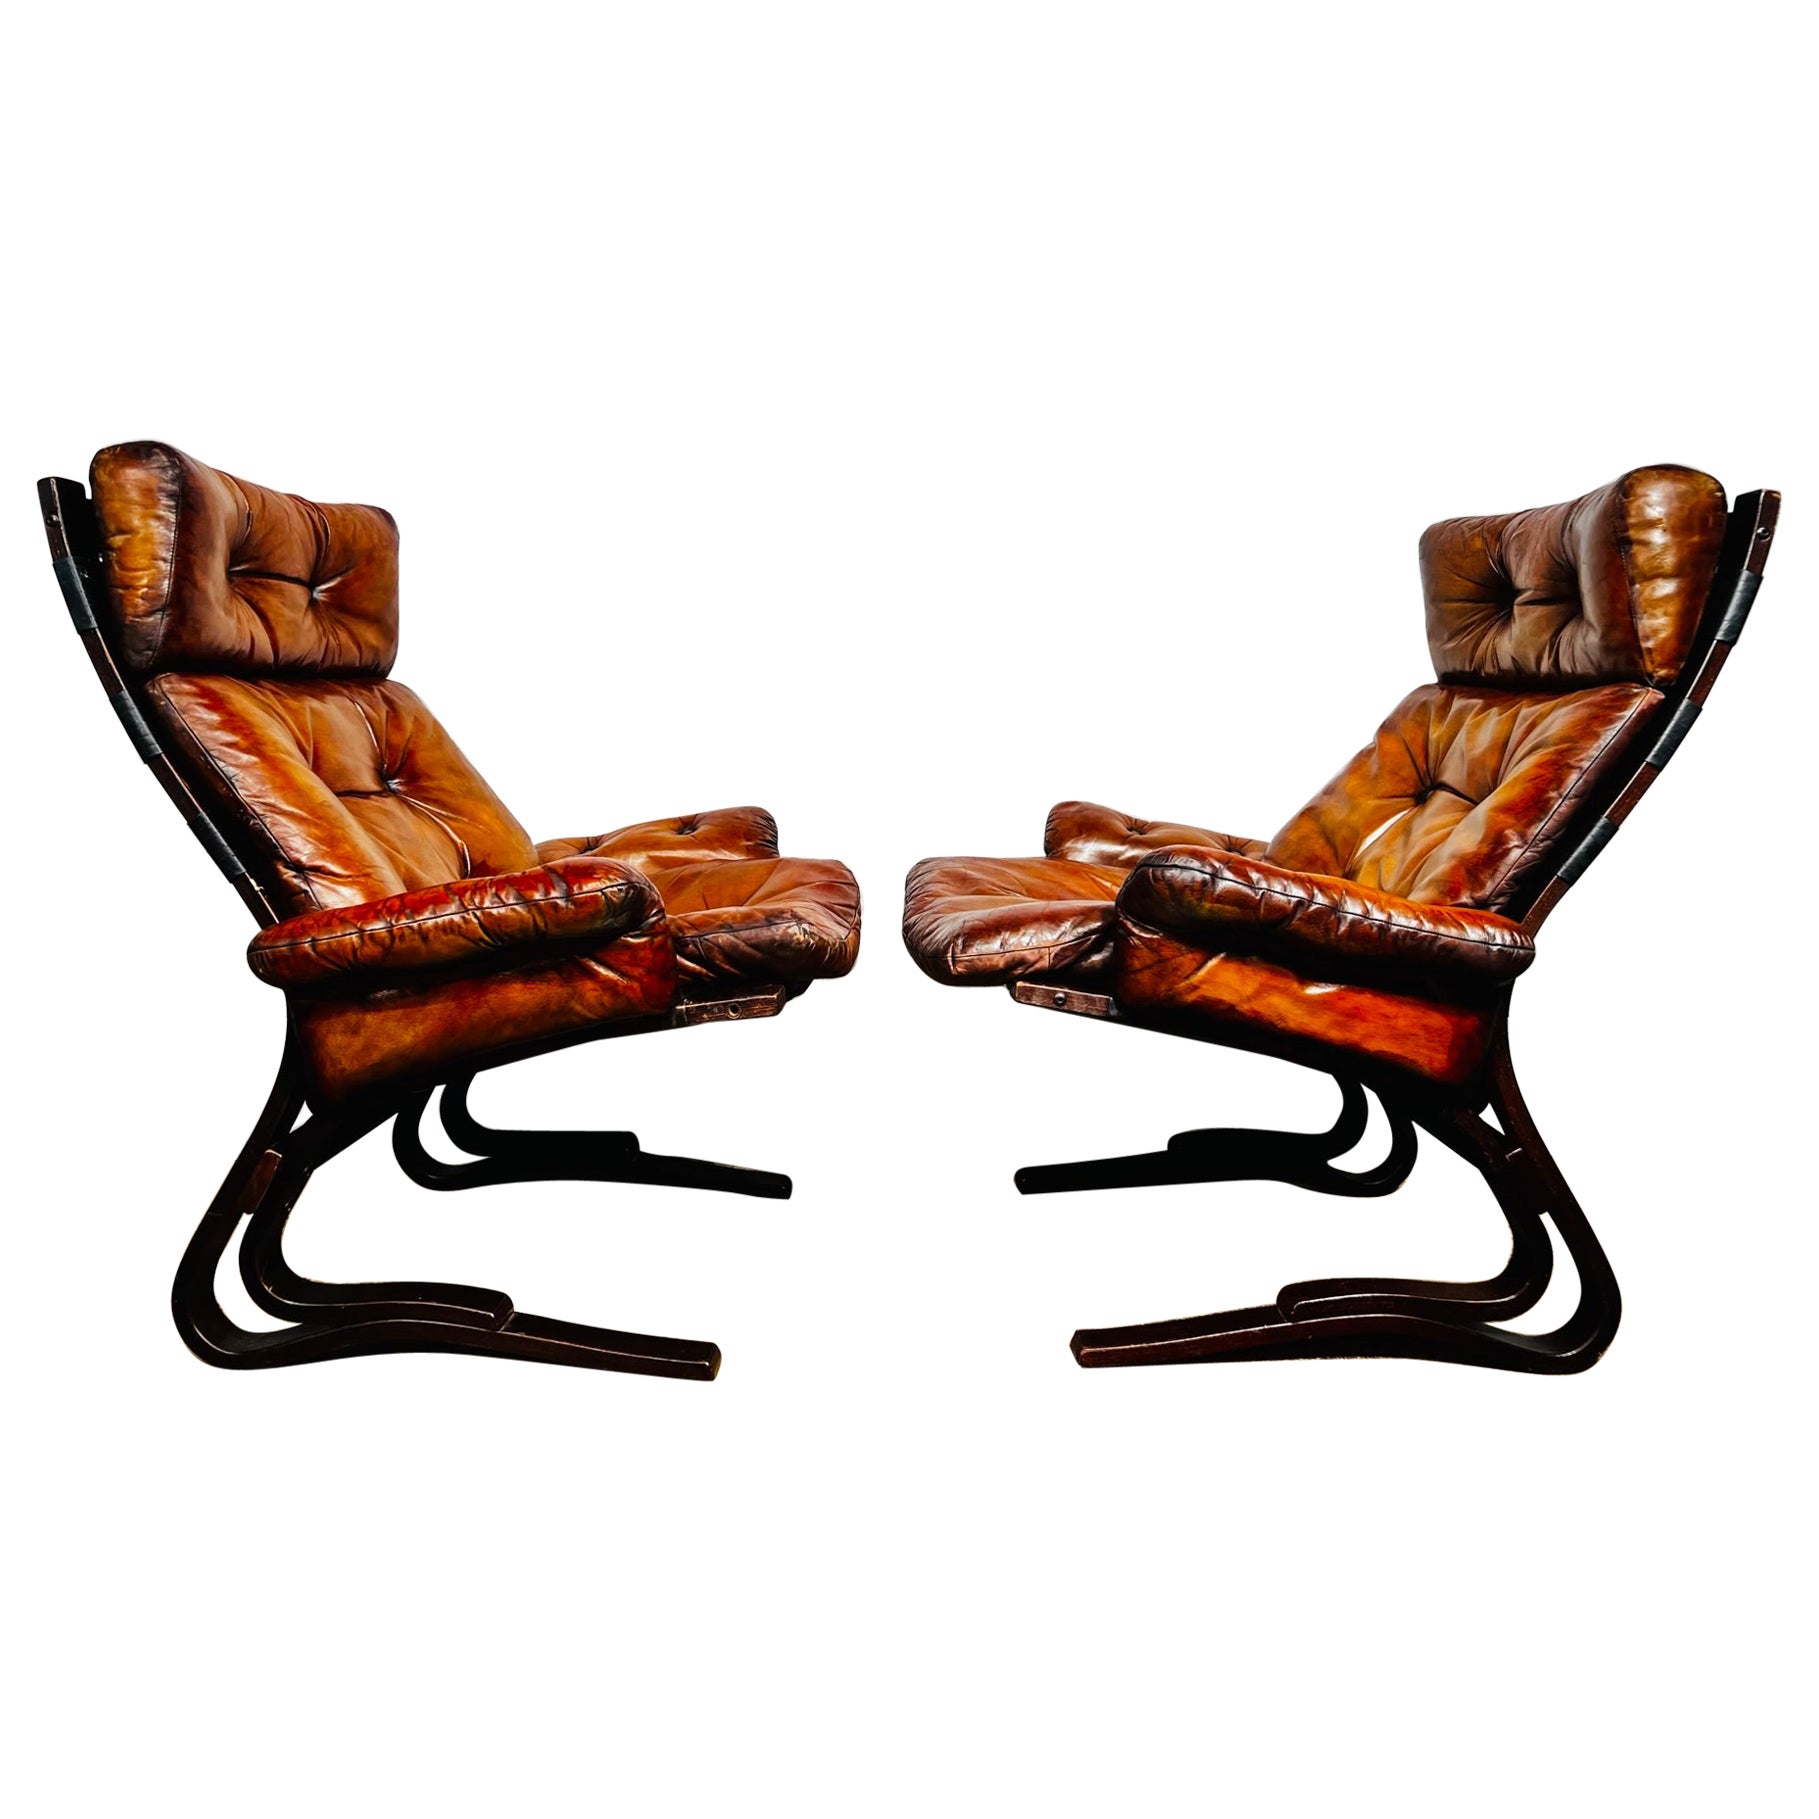 Pair of Vintage Skyline Bentwood & Leather Chairs by Einar Hove Norway #656 For Sale